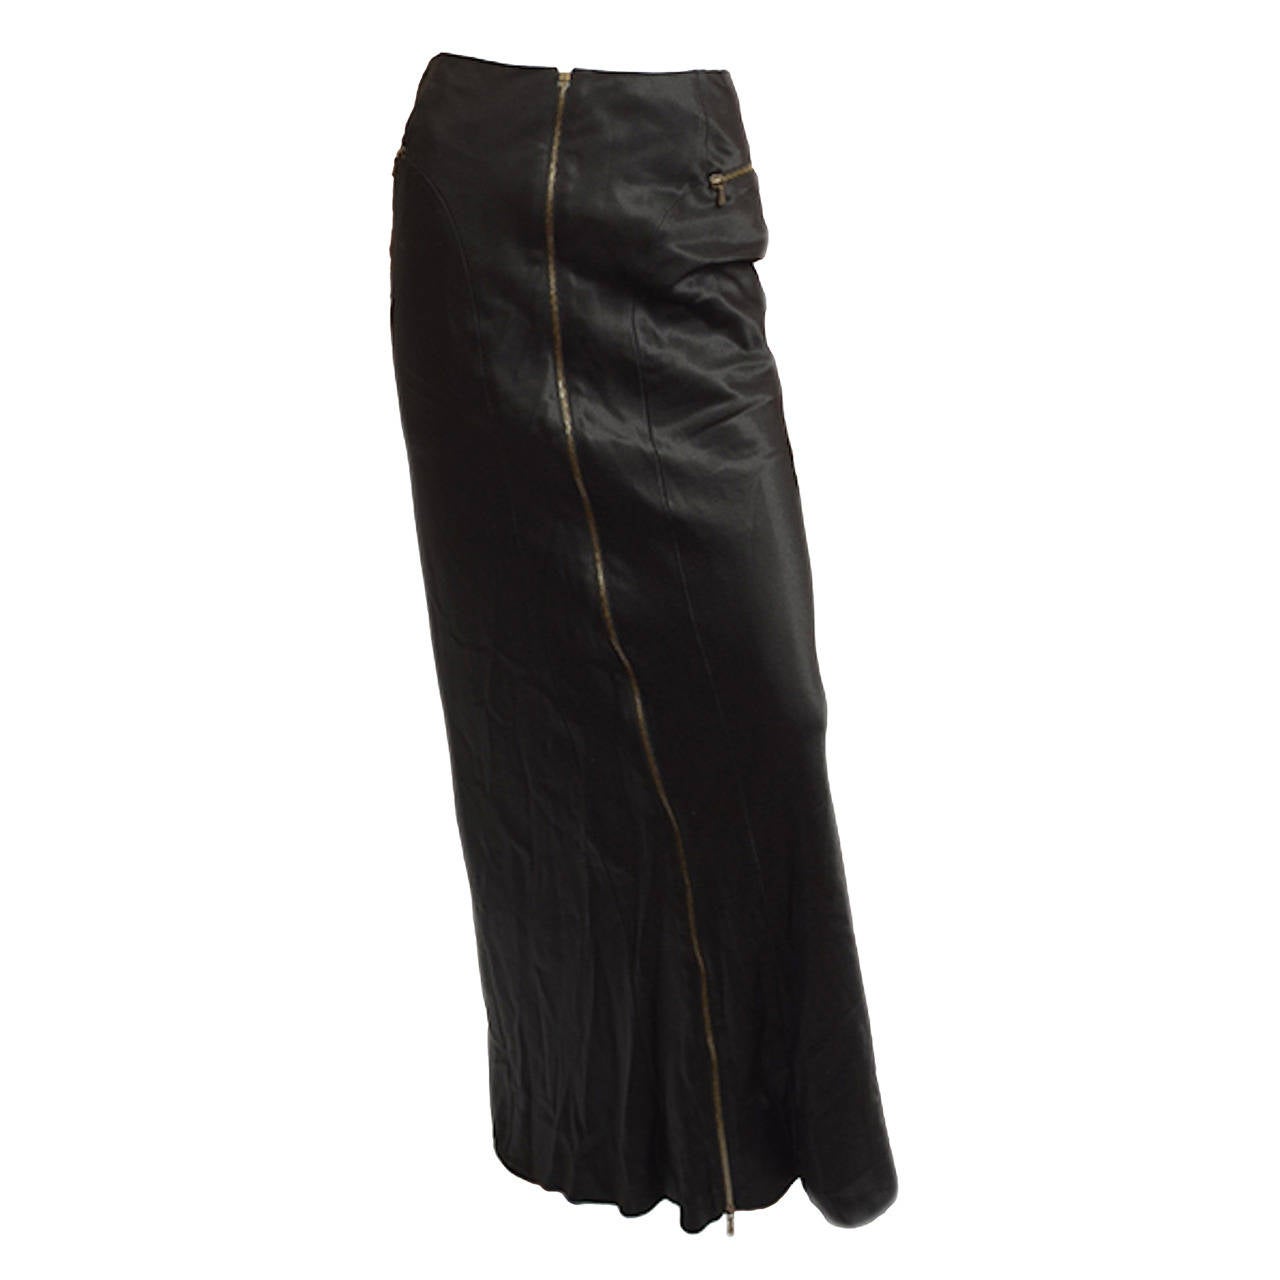 CHRISTIAN DIOR BOUTIQUE Black Zipper Accented Evening Skirt 36 4 NWT For Sale